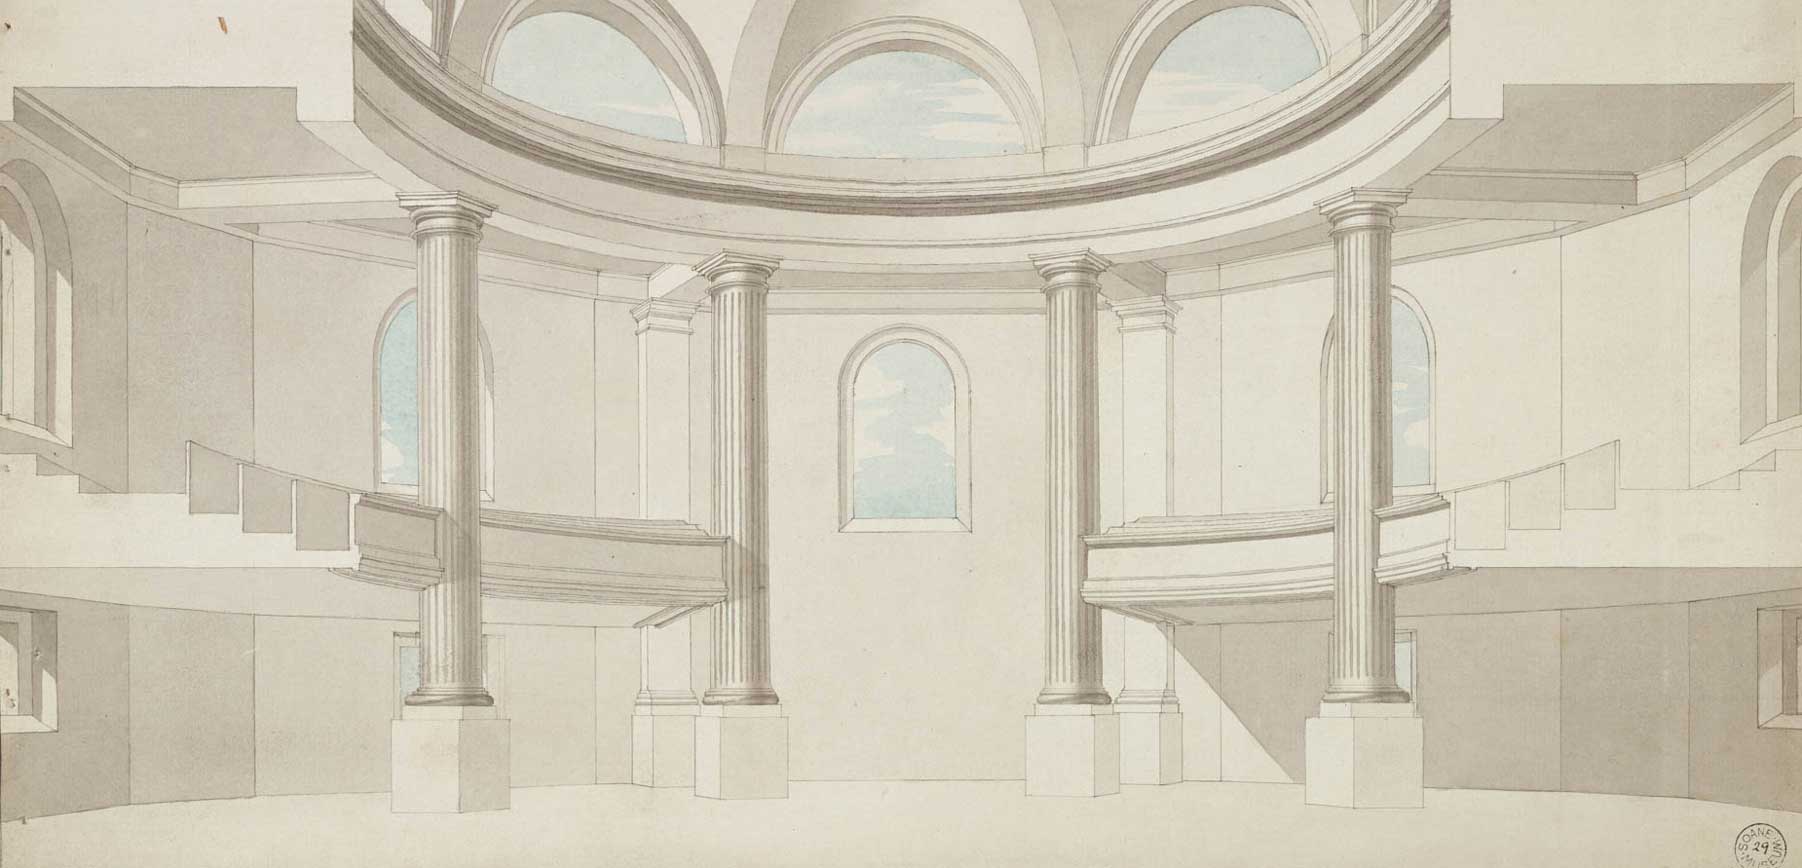 An early concept by James Spiller for the new Hackney Church. 